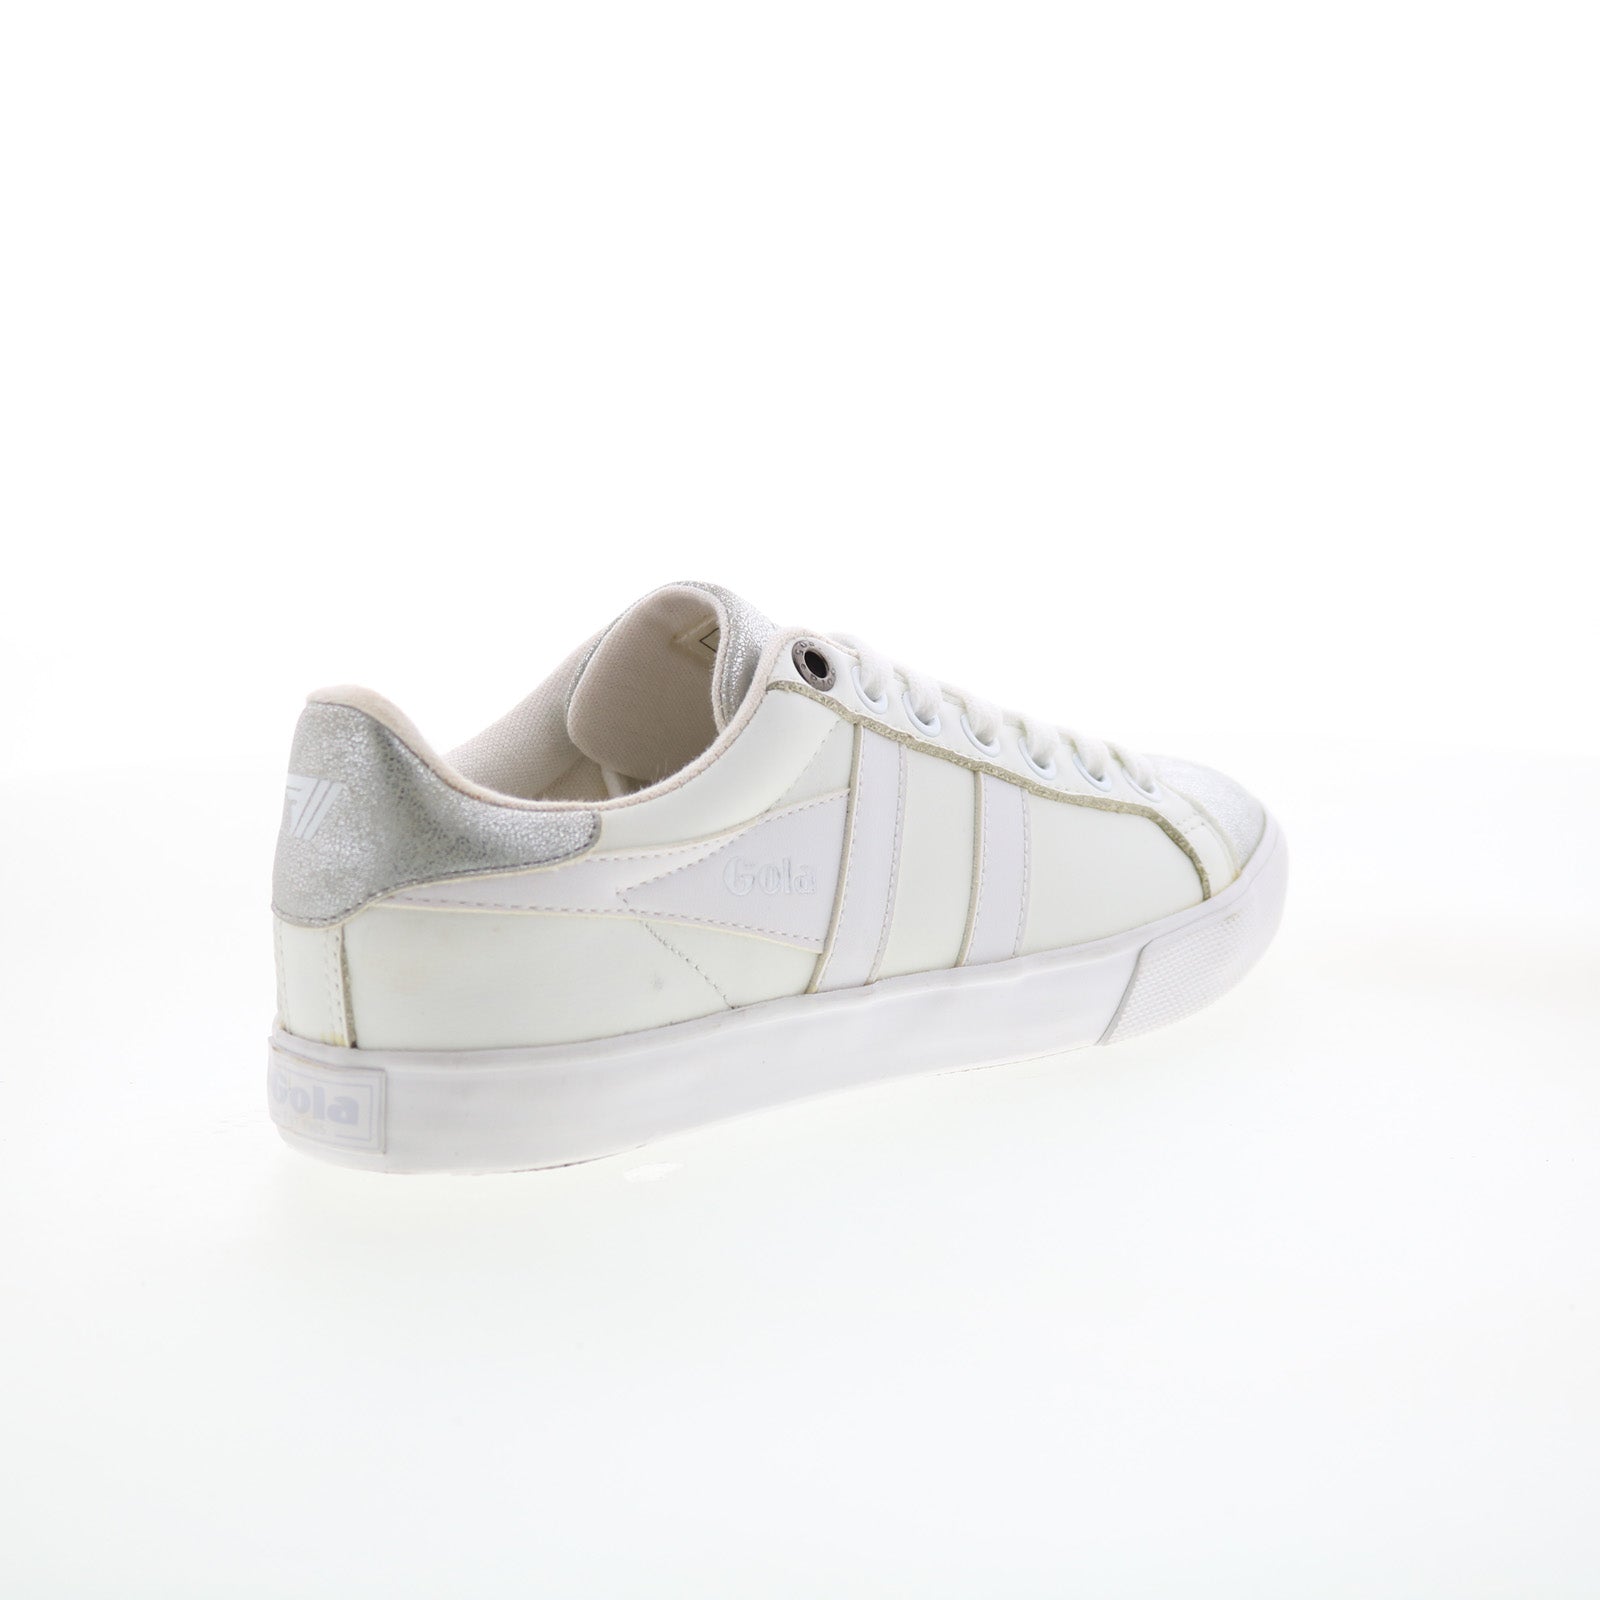 Gola Orchid CLA668 Womens White Leather Lace Up Lifestyle Sneakers Shoes